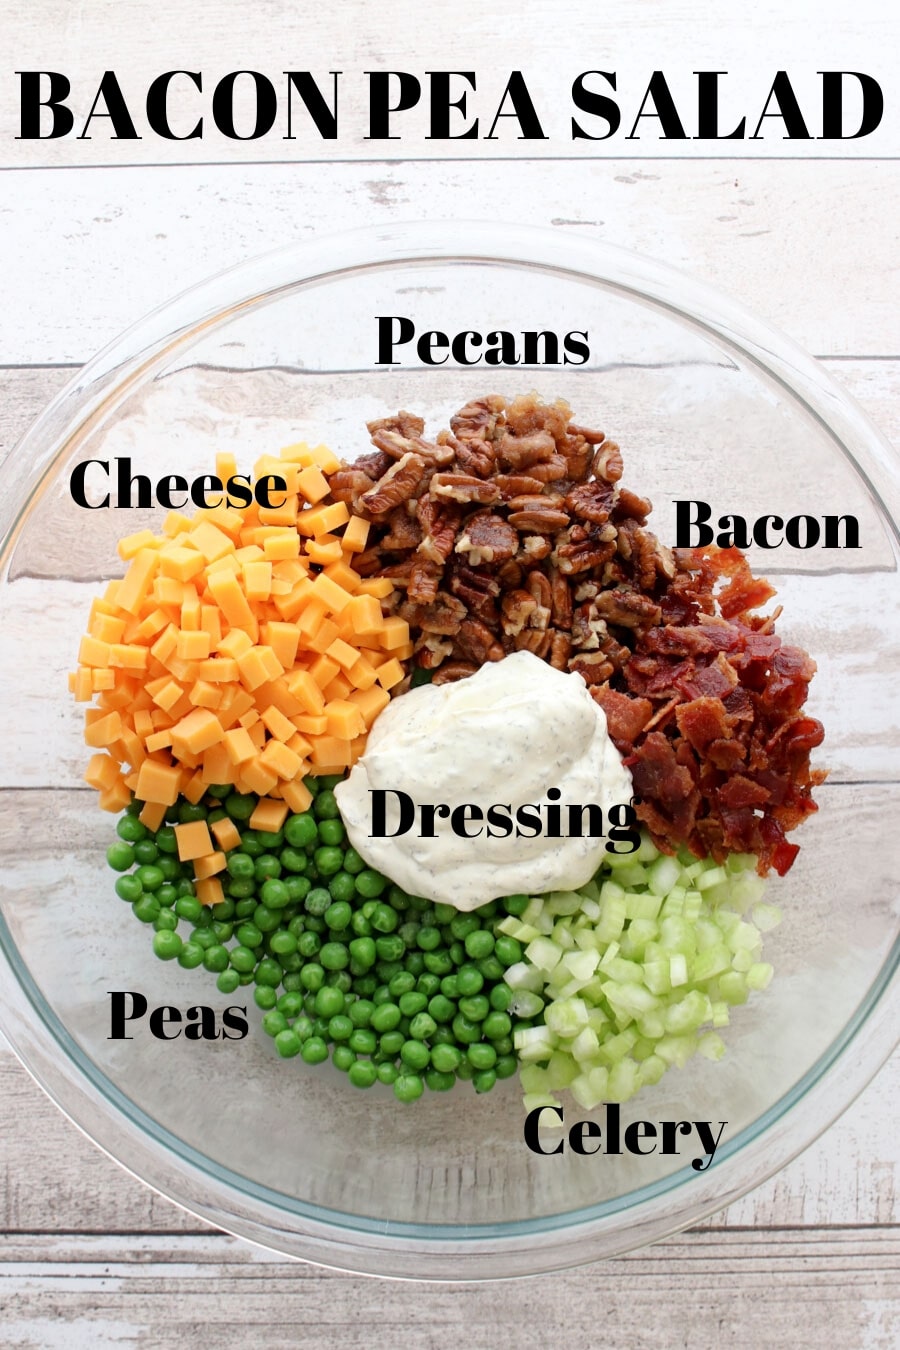 Bowl of the ingredients for bacon pea salad